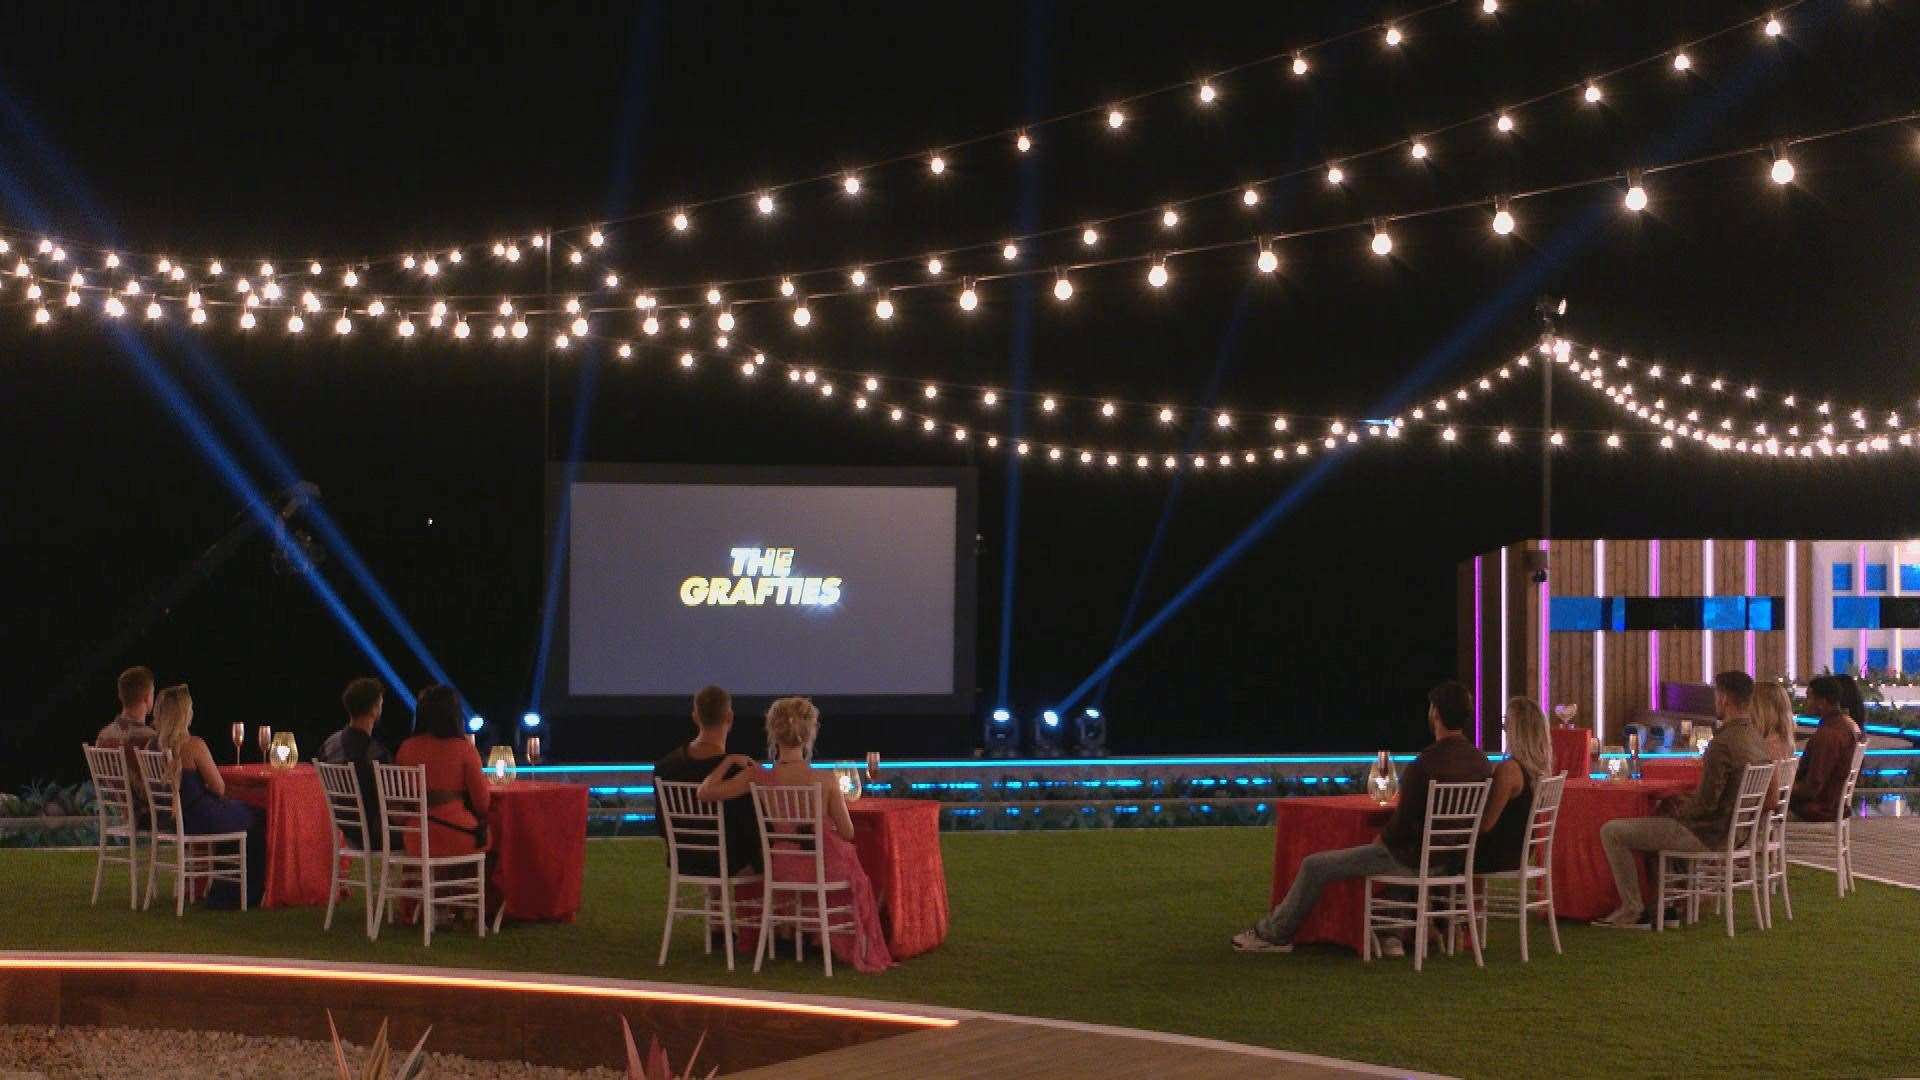 All the islanders sit down to watch ‘the Grafties’ awards. Picture: ITV